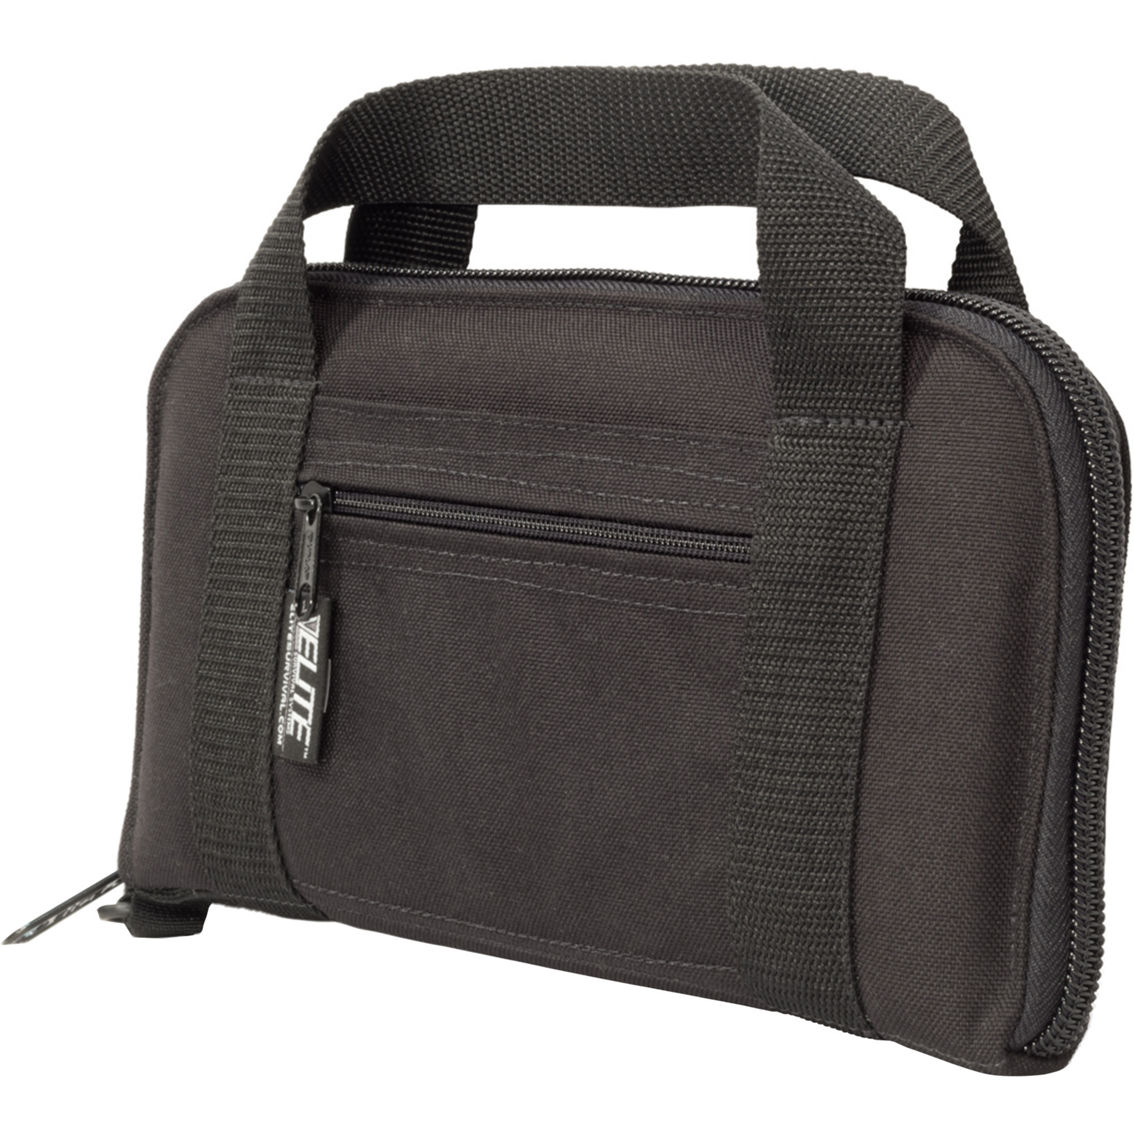 Elite Tactical Systems Pistol Case, 20 x 10 in. - Image 2 of 2